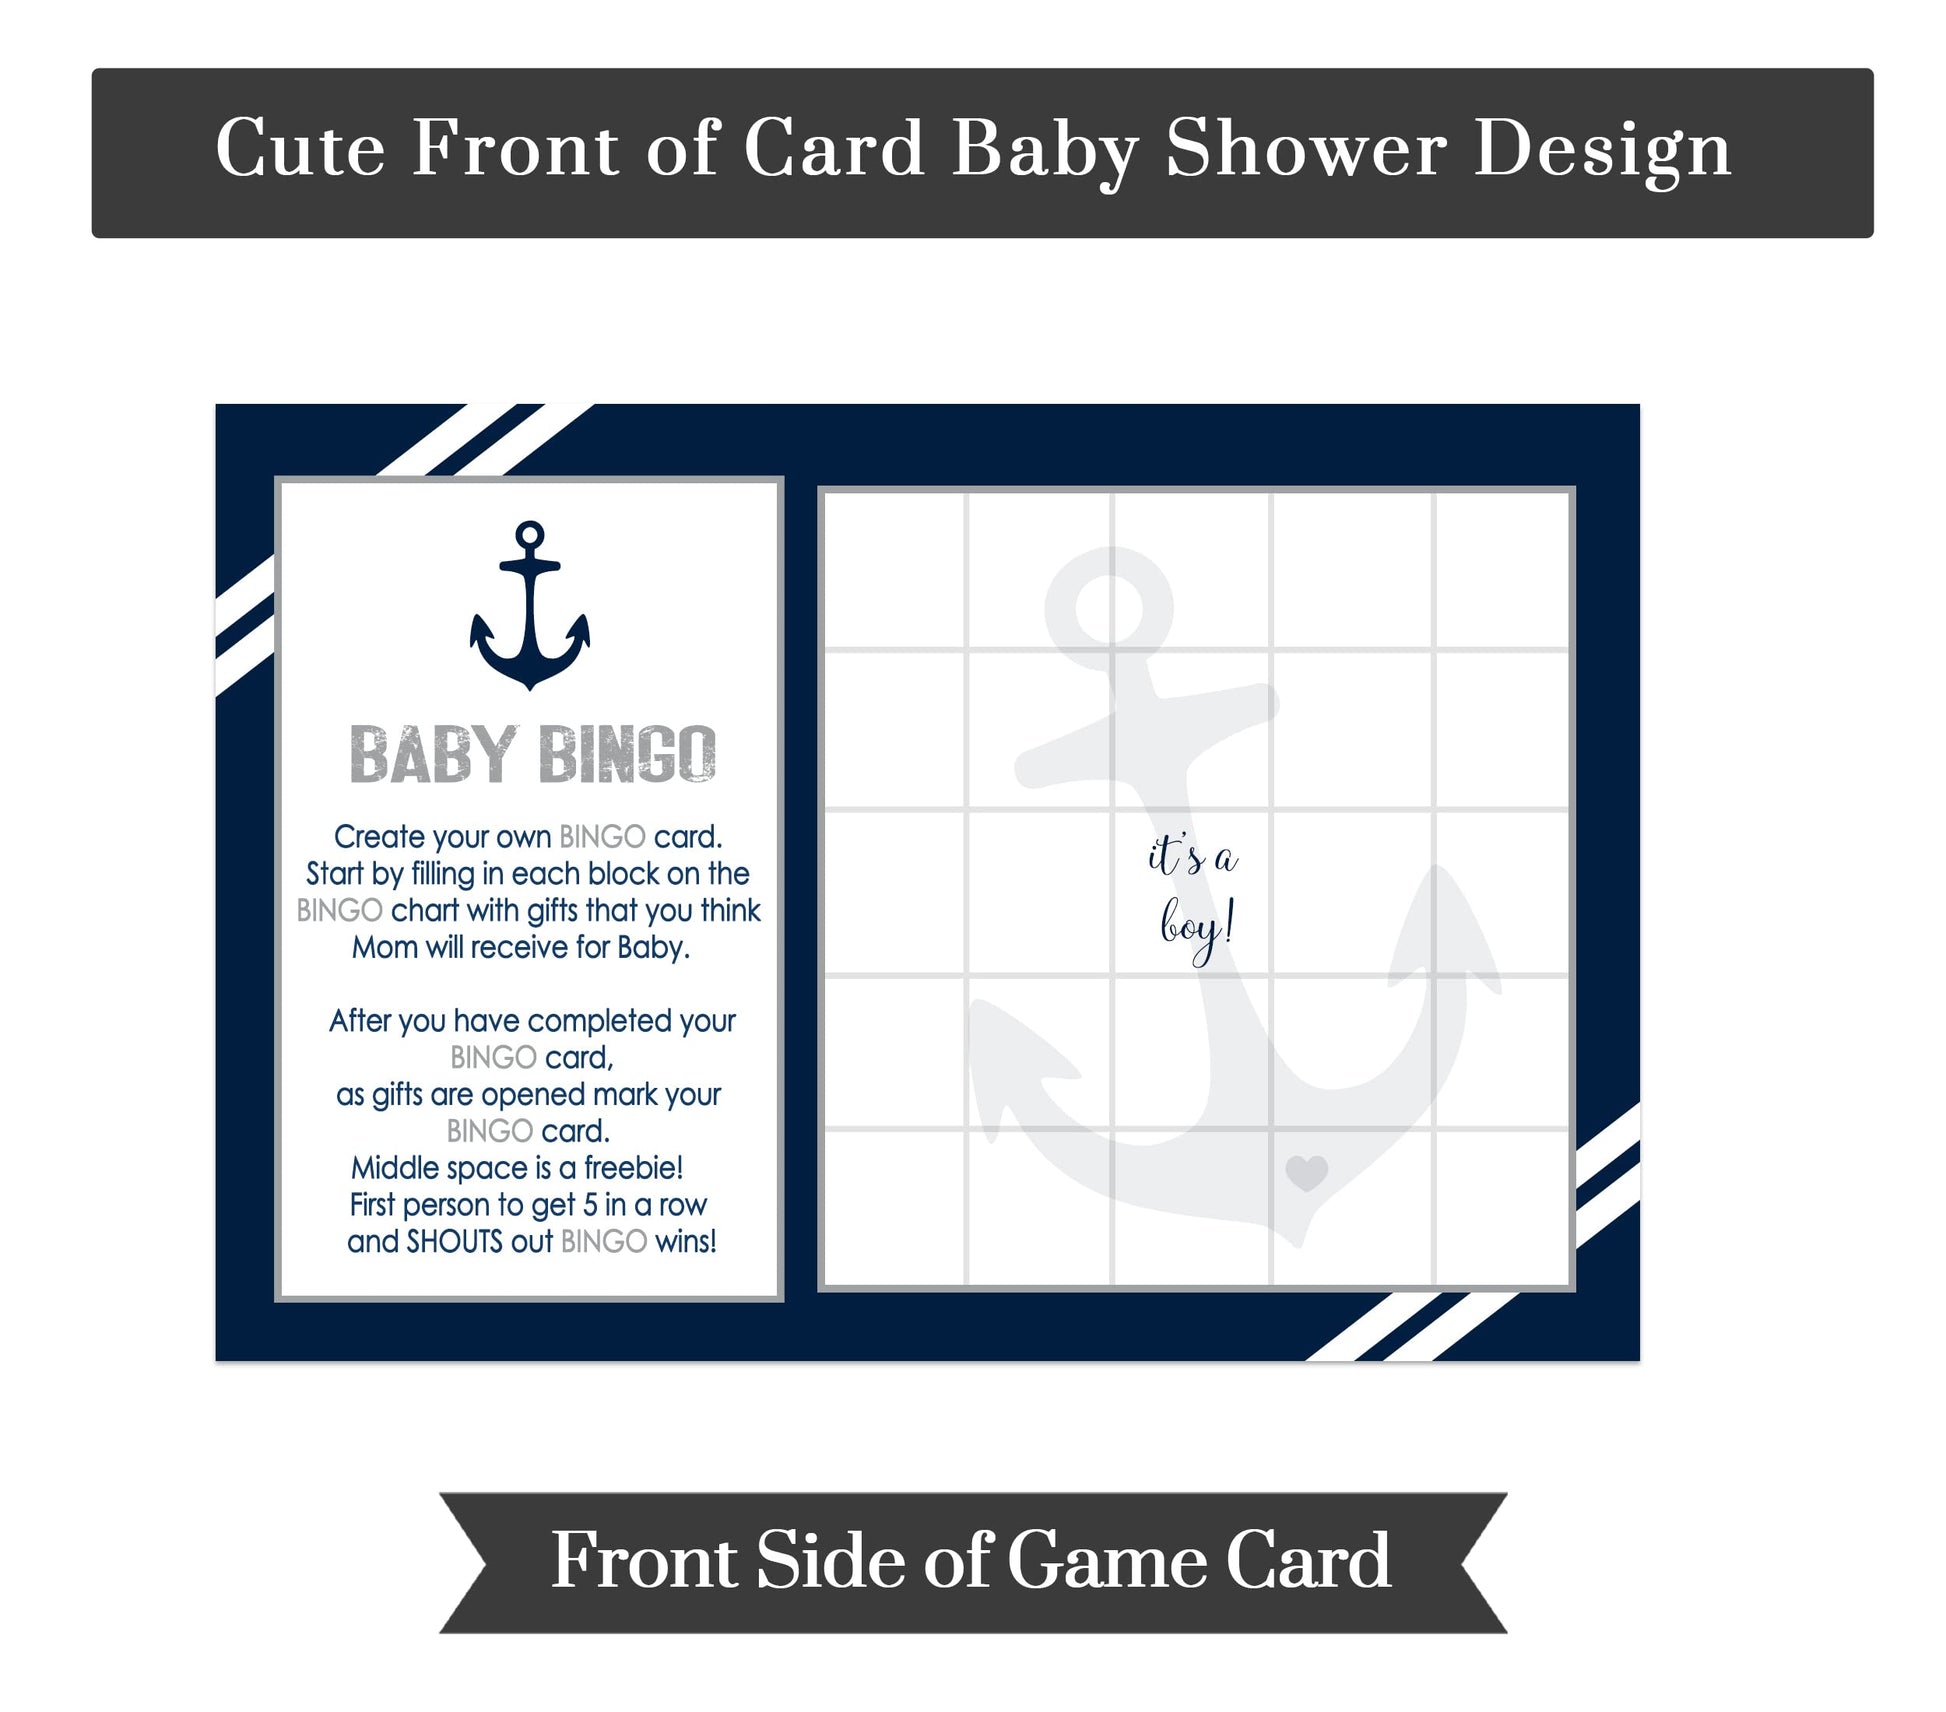 Paper Clever Party Nautical Baby Shower Bingo Game Blank Cards GuestsPaper Clever Party